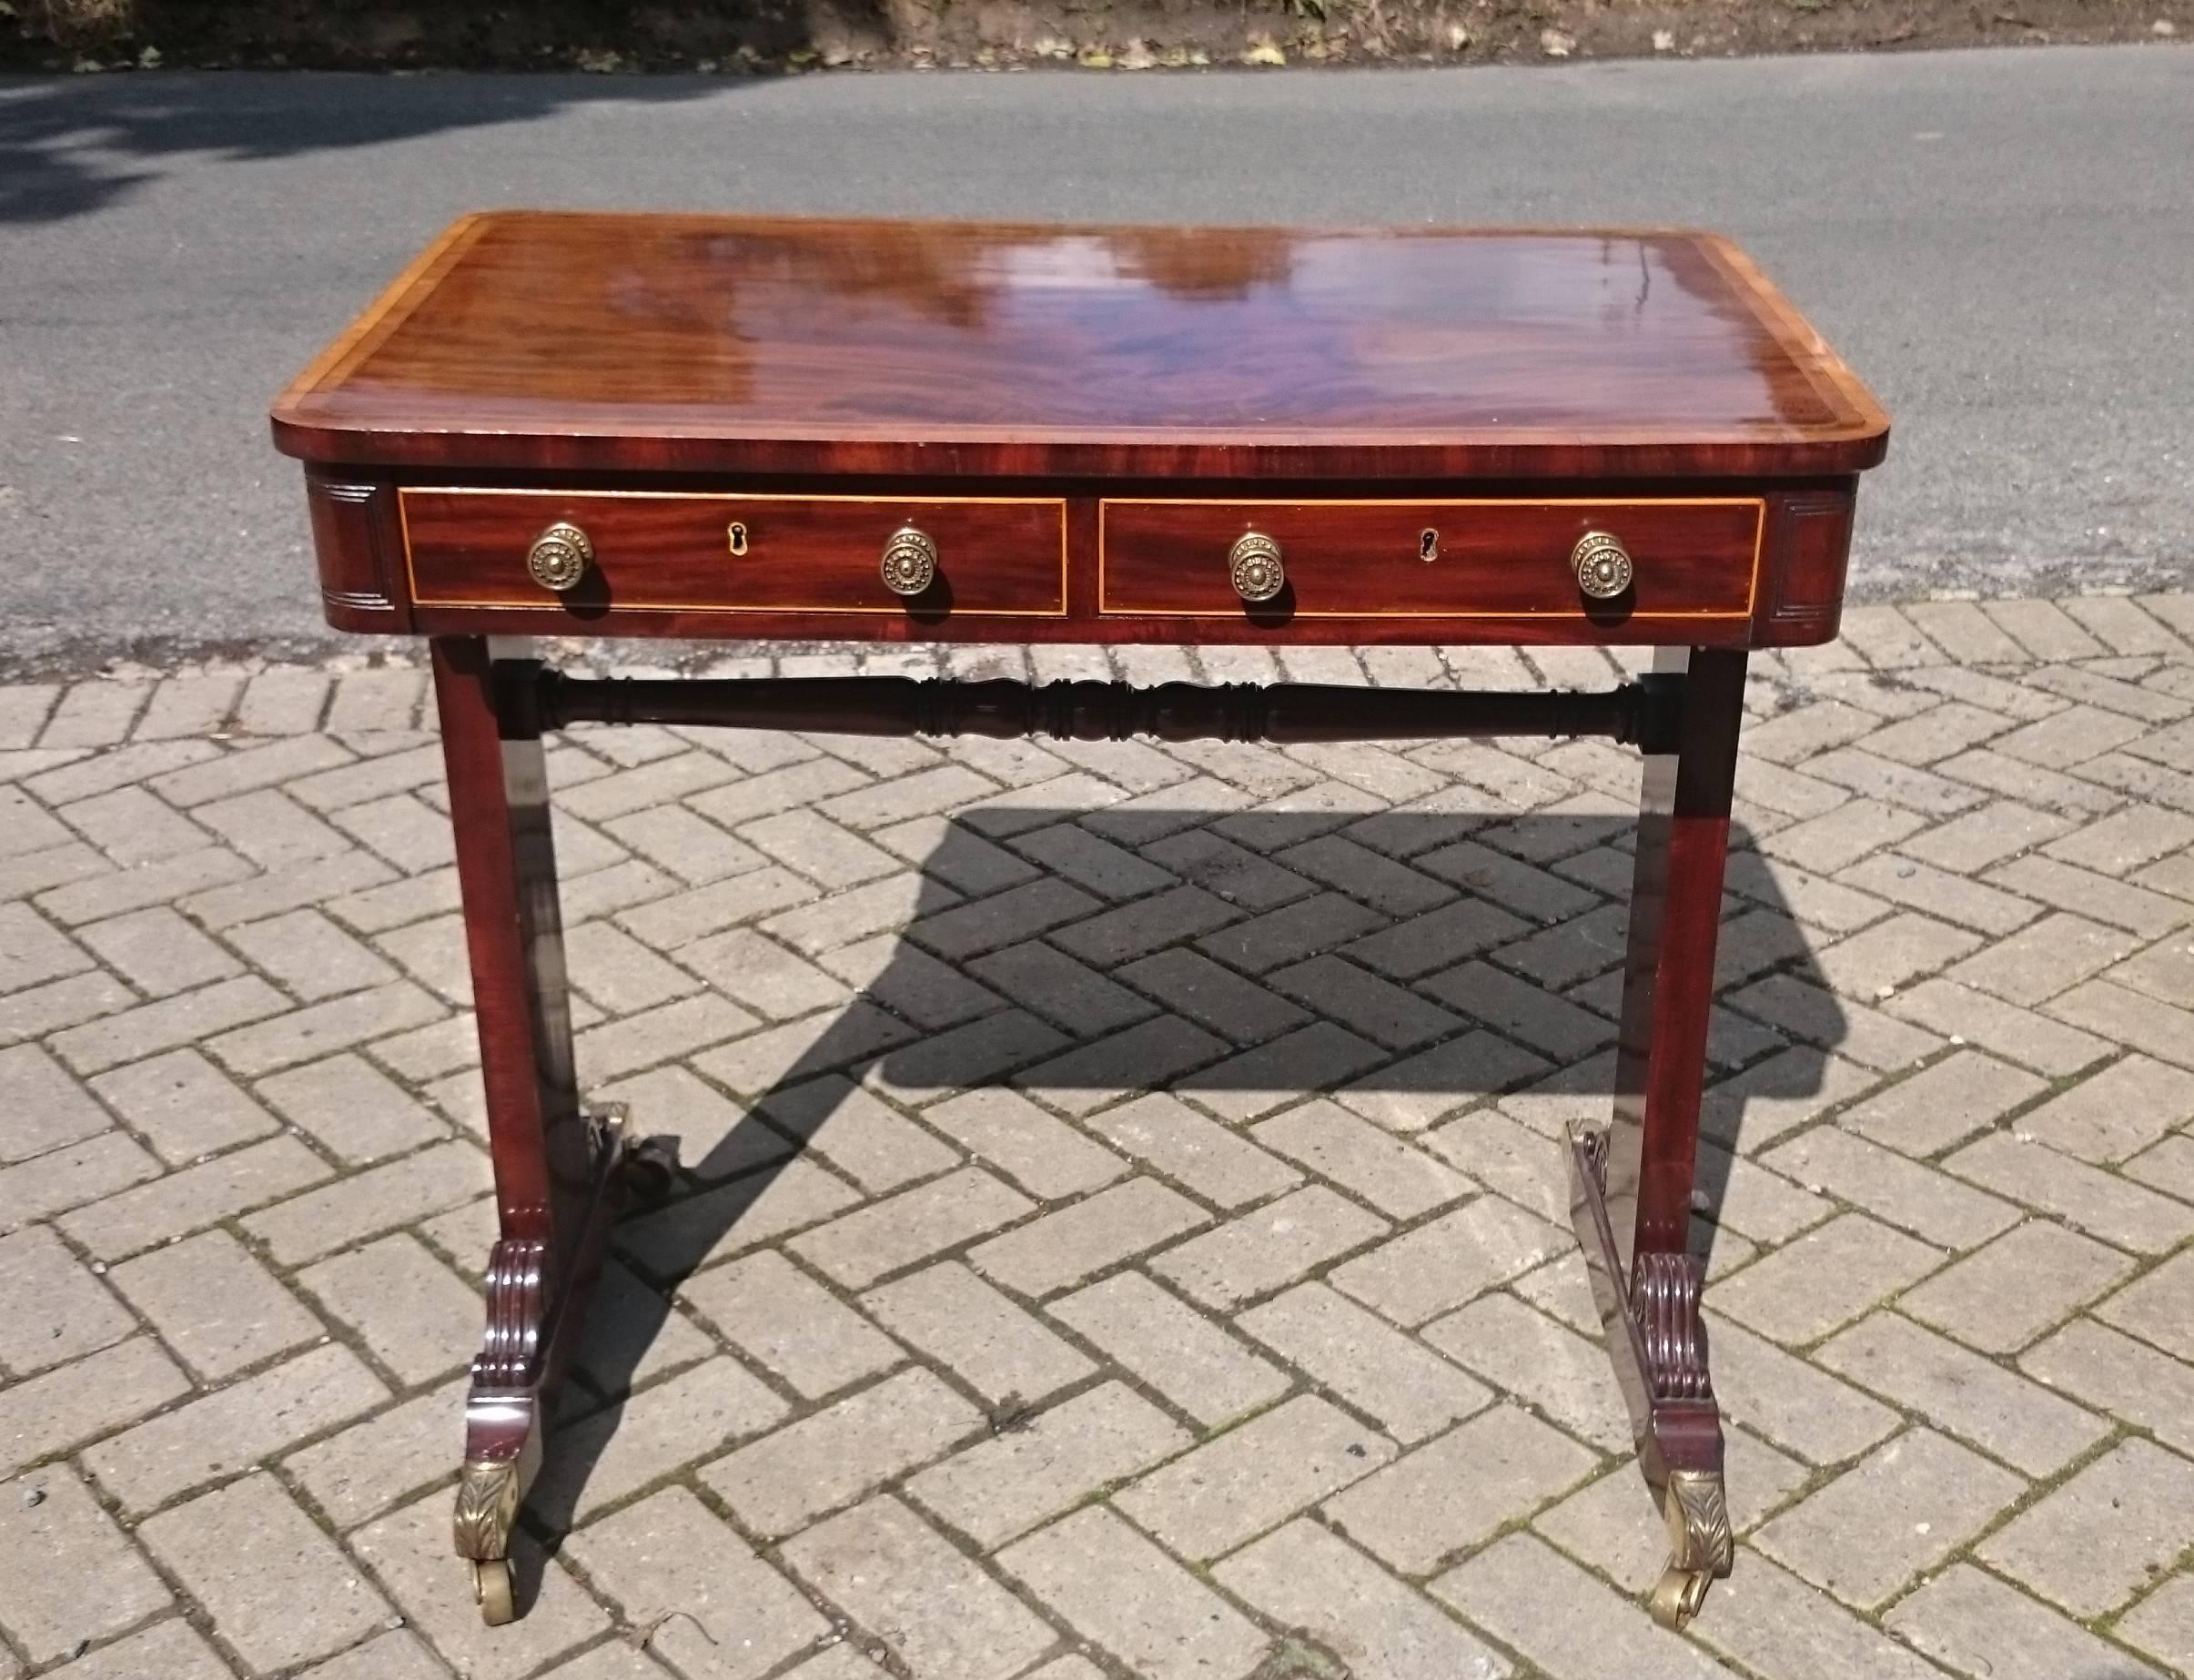 Regency mahogany centre table / writing table / lamp table, the rectangular top crossbanded in tulipwood and fruitwood, with two drawers in the frieze and the feet with scrolled reeded brackets. 

English circa 1810 
Provenance: Sold and valued